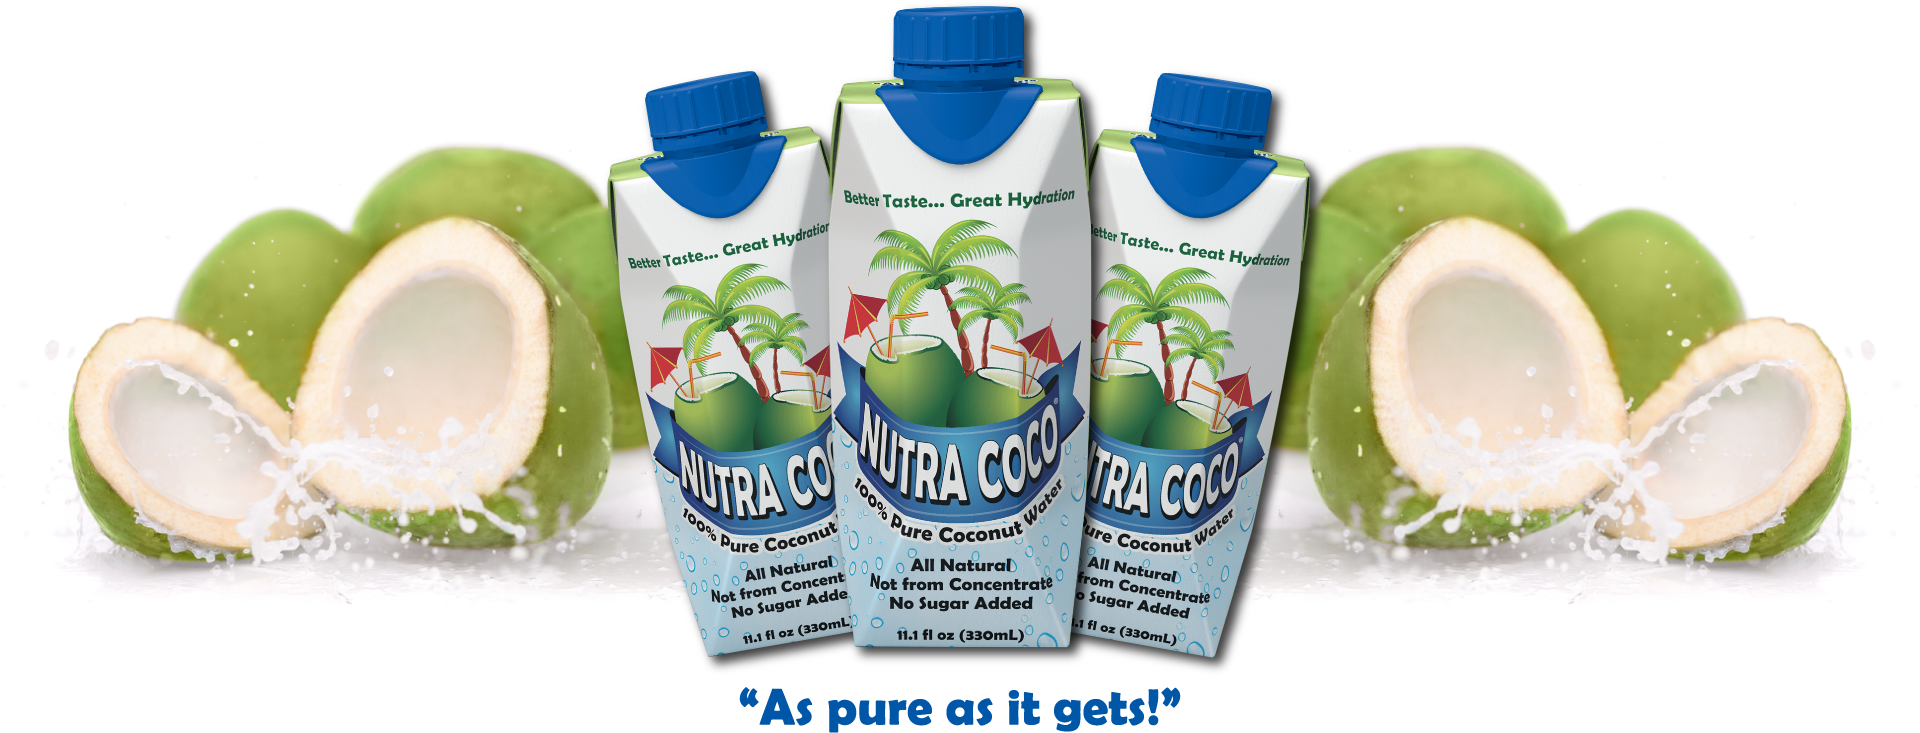 Nutra Coco - As Pure as it Gets